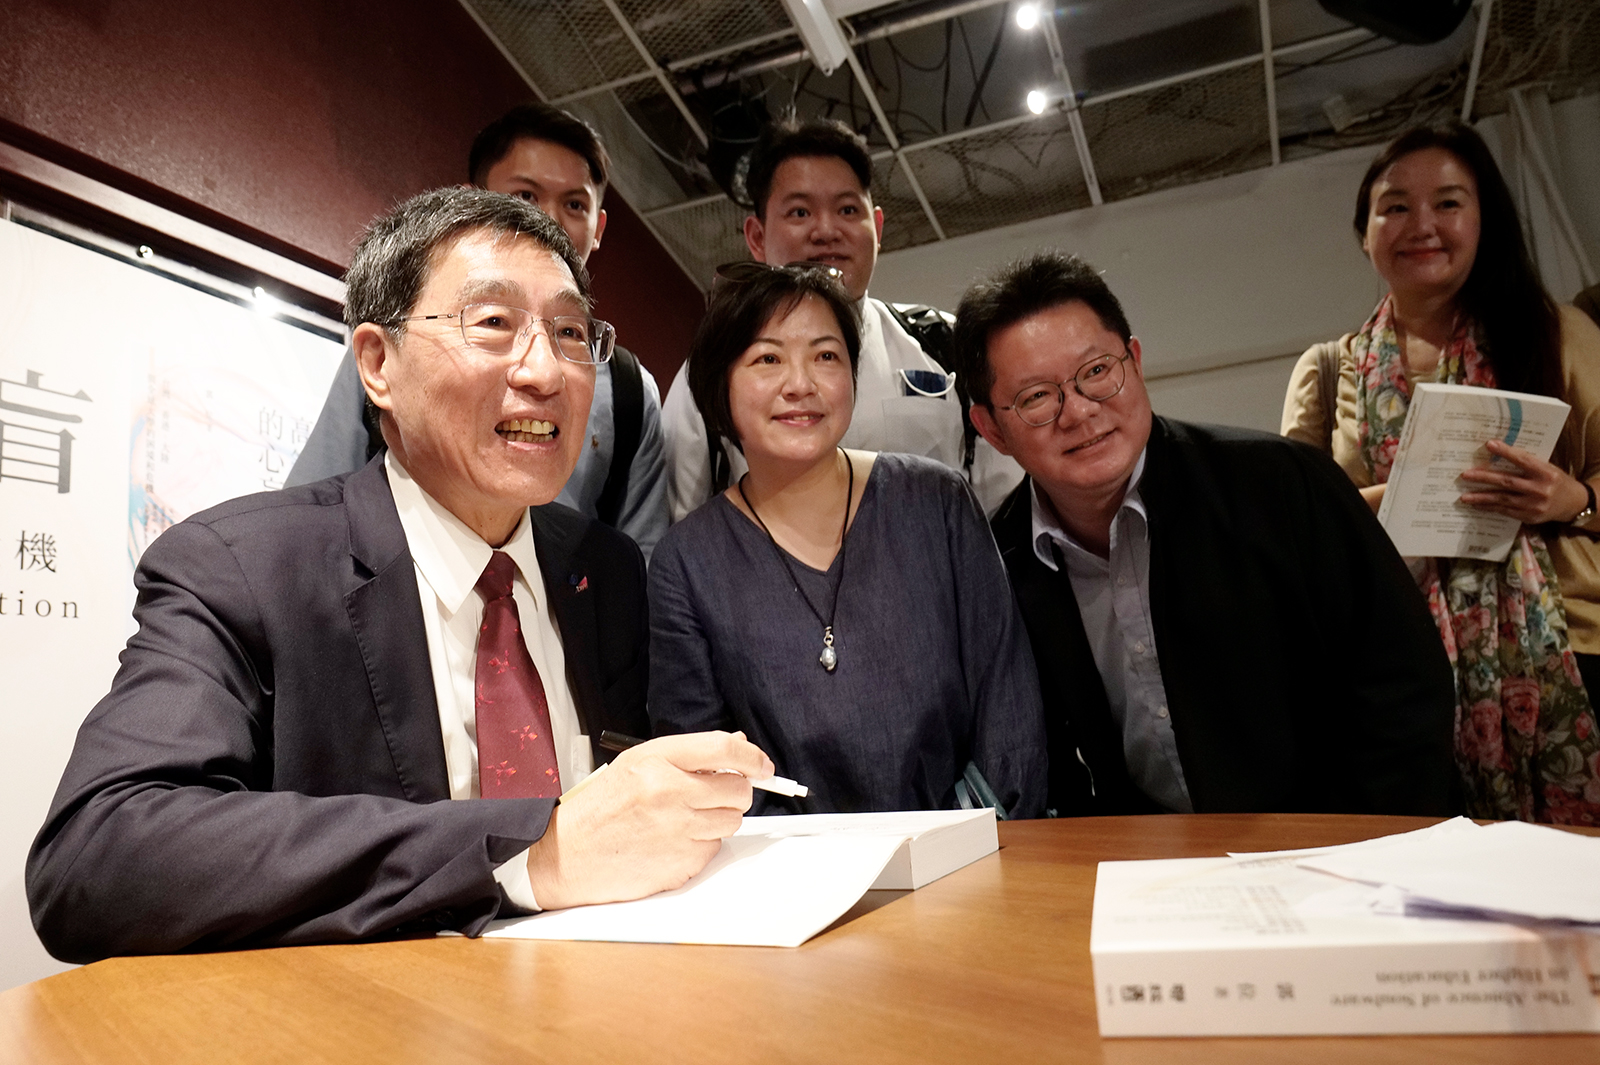 Attendees enthusiastically asked President Kuo to autograph his new book.